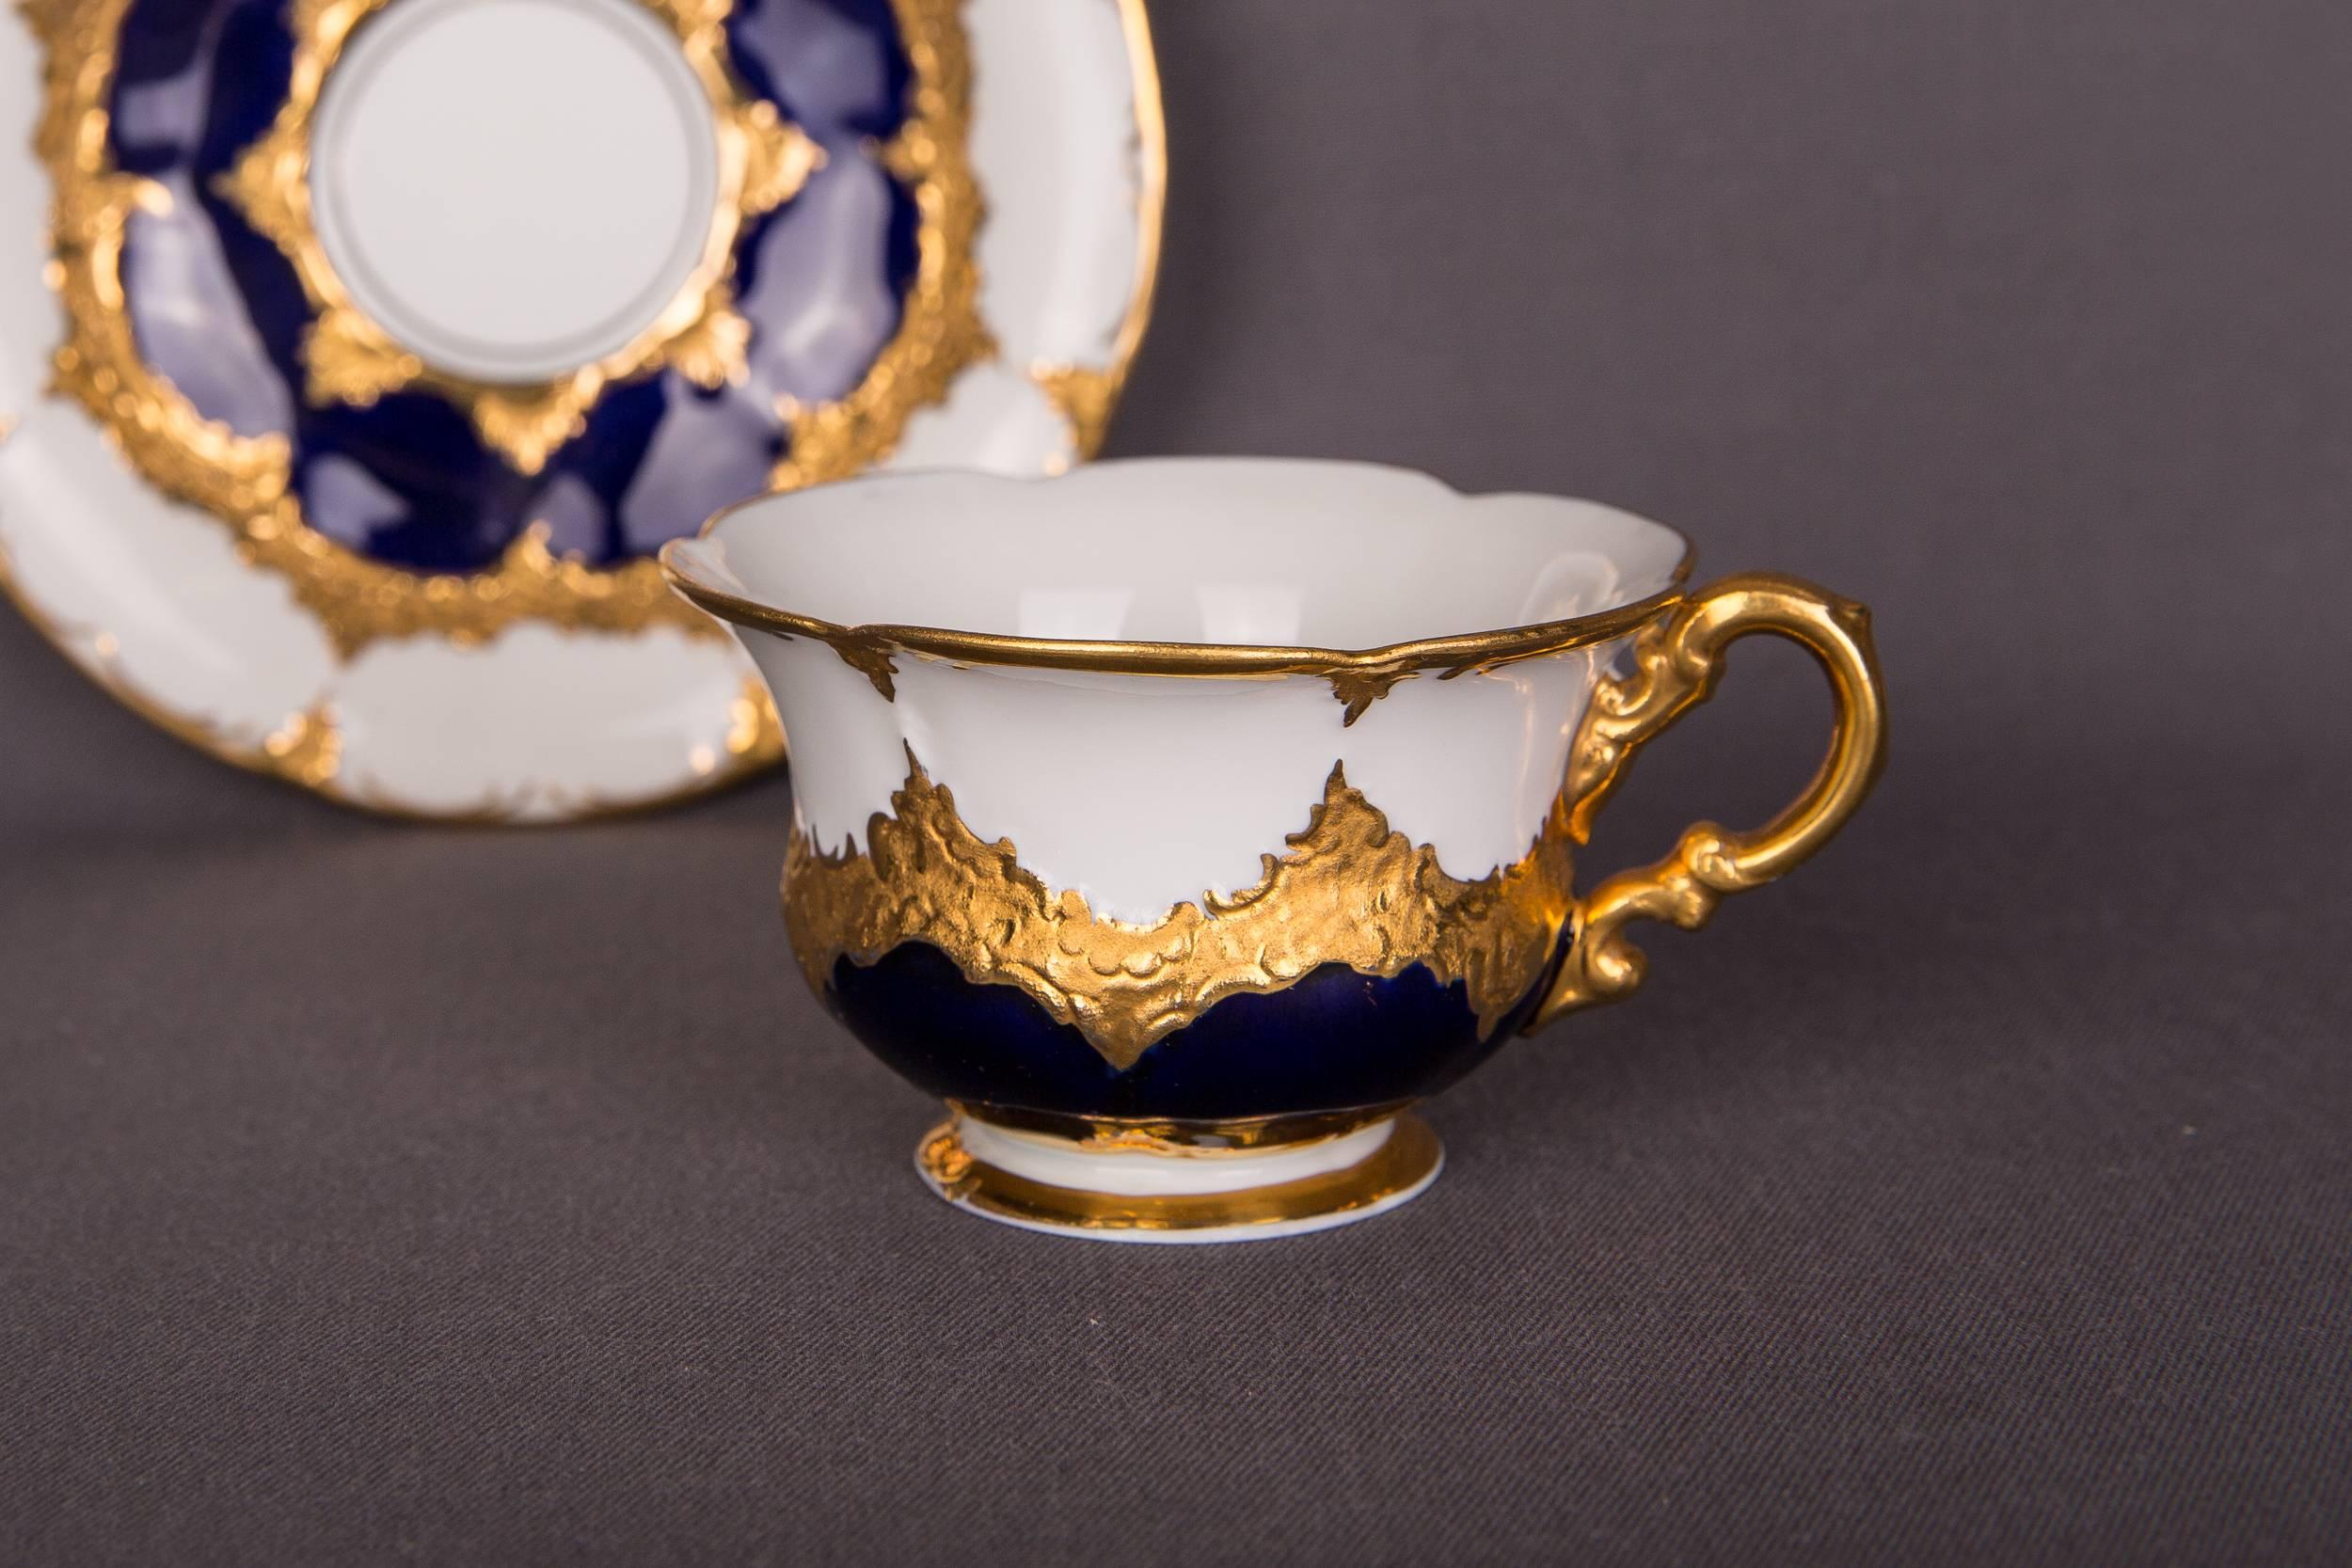 Porcelain Stunning Meissen Mocha Cup in Decor B Shape with Lots of Gold